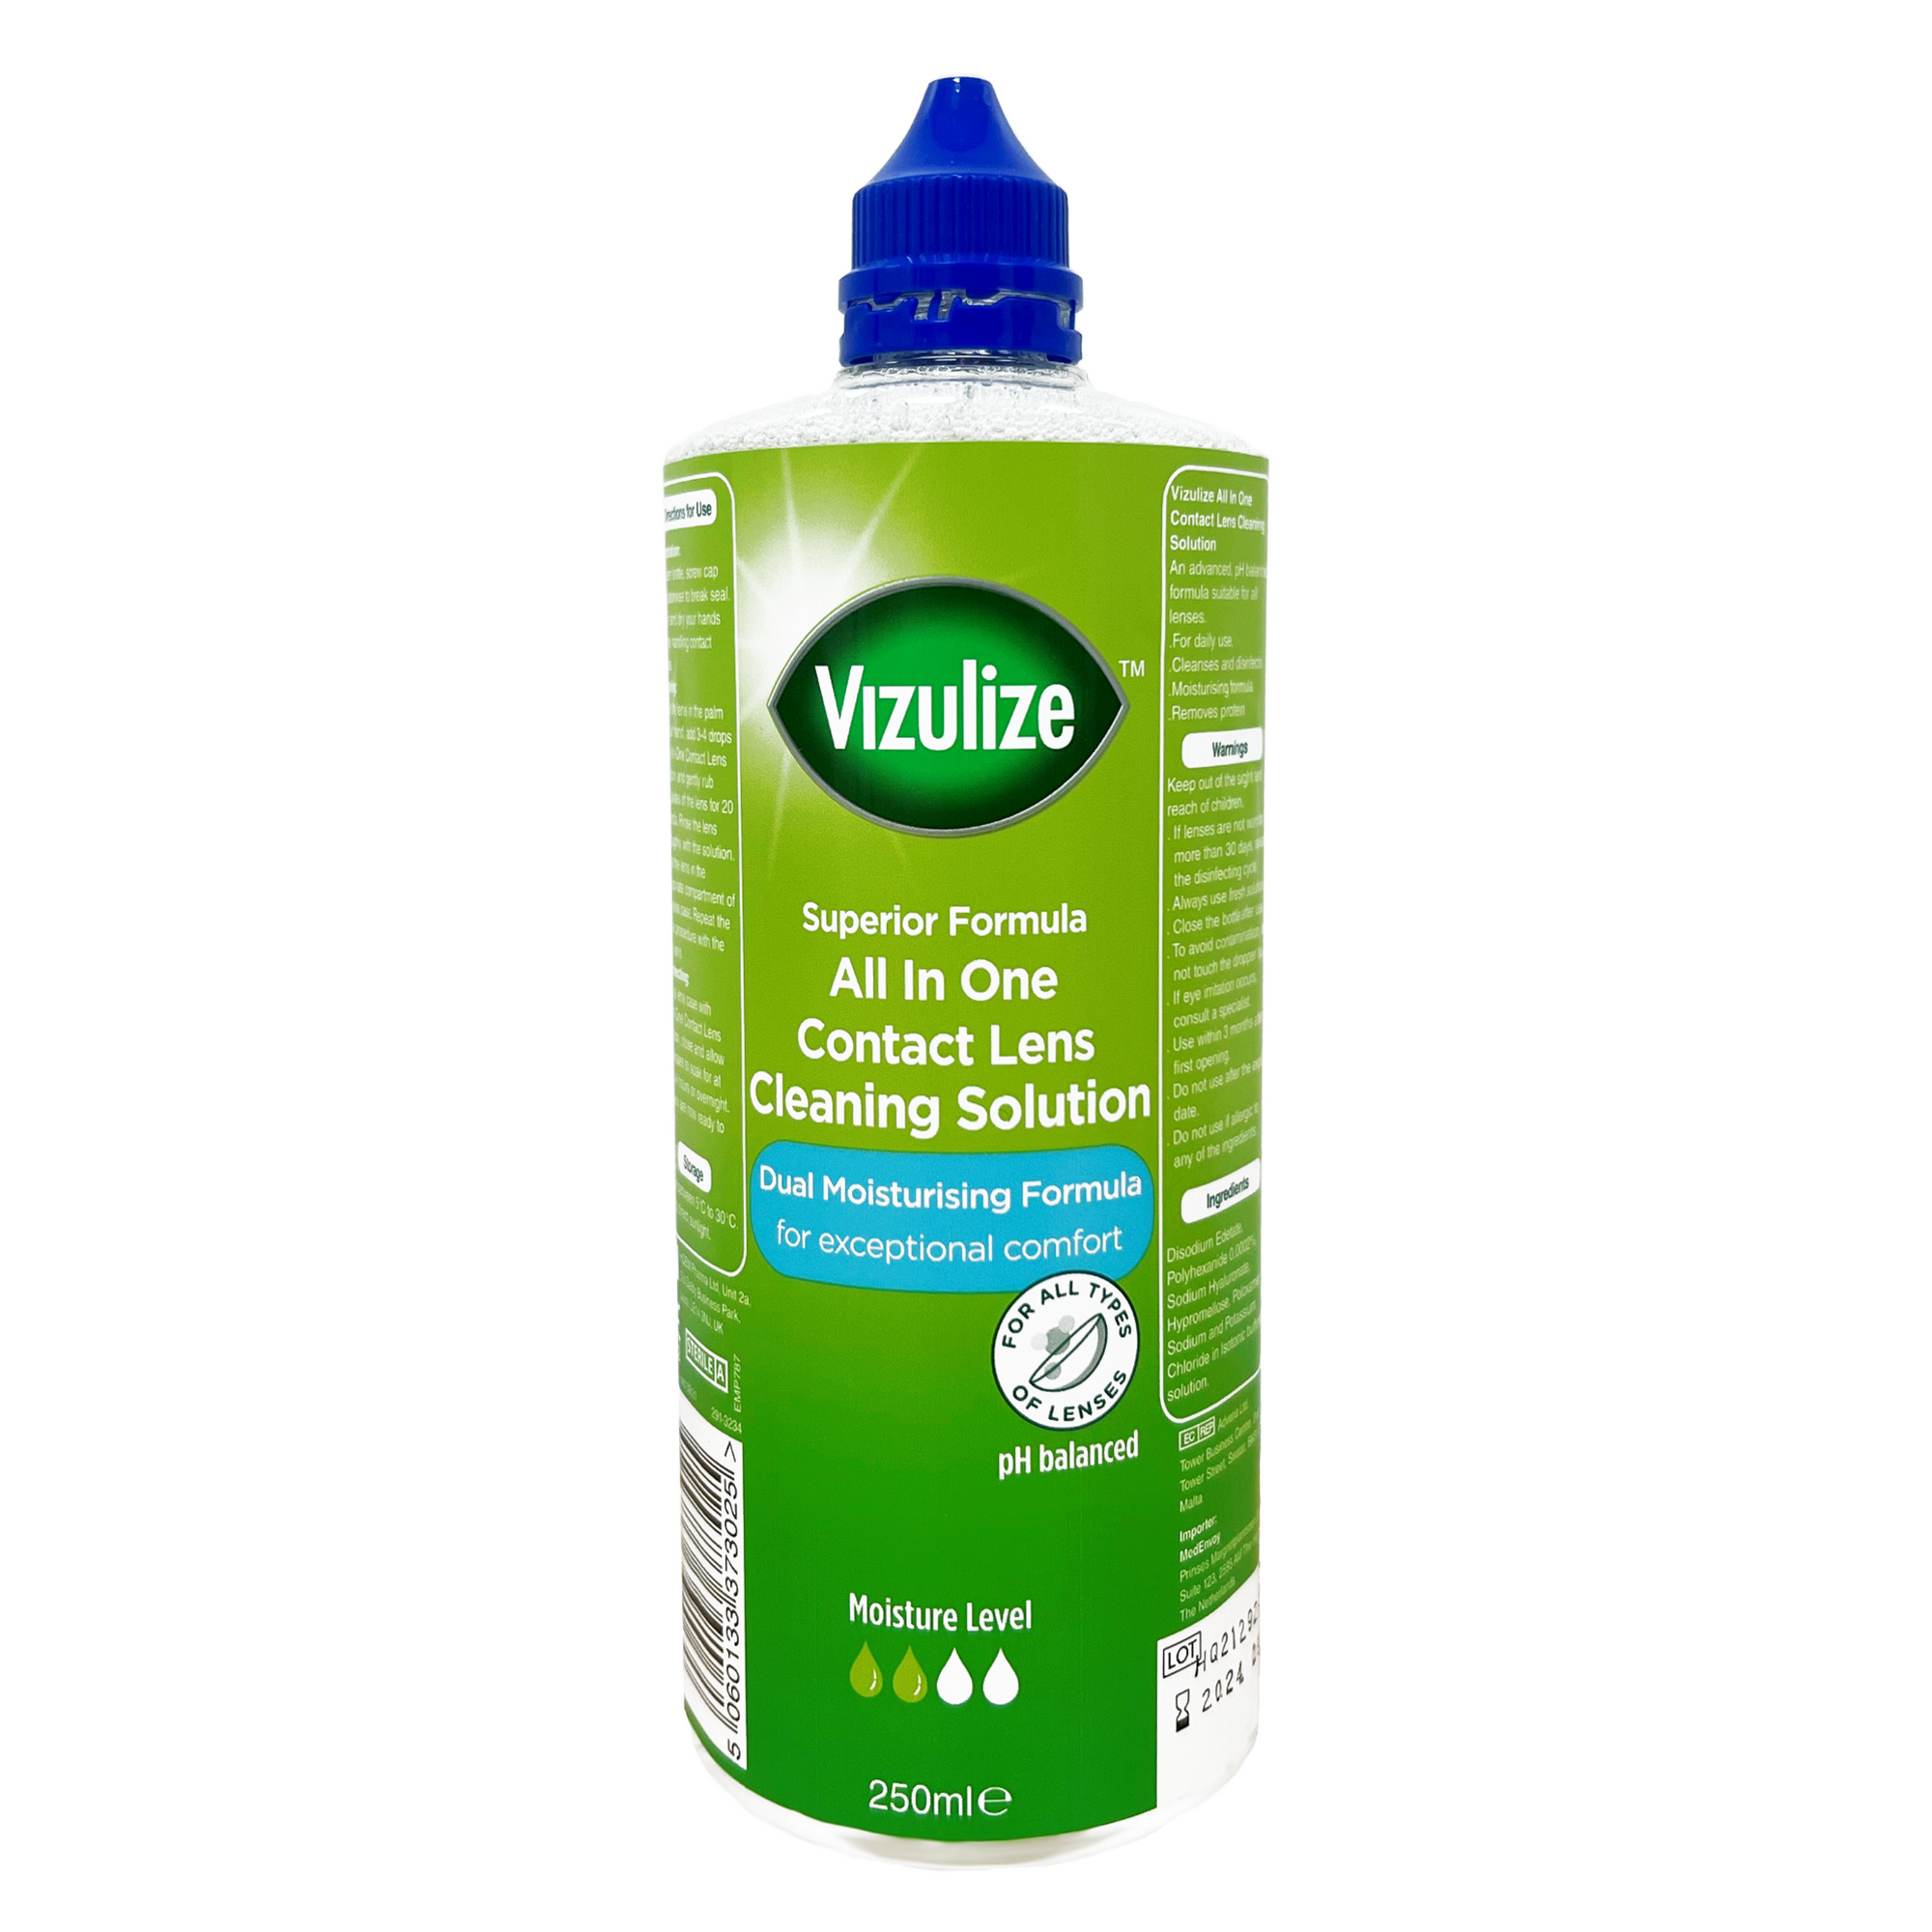 Vizulize All in One Contact Lens Cleaning Solution 250ml